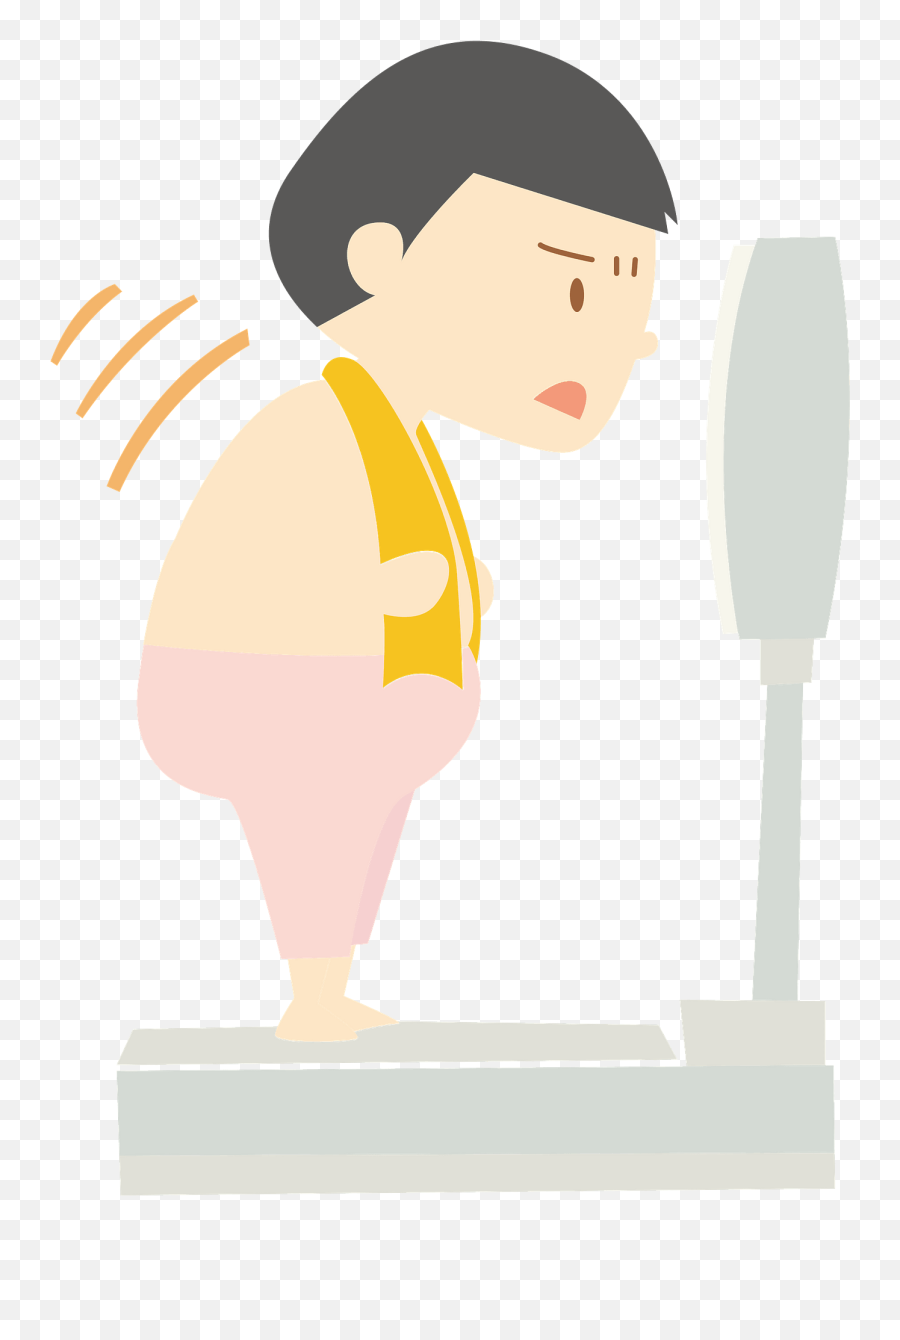 Man Is Weighing Himself On A Scale Clipart Free Download - Man In Weighing Scake Cartoon Emoji,Scale Clipart